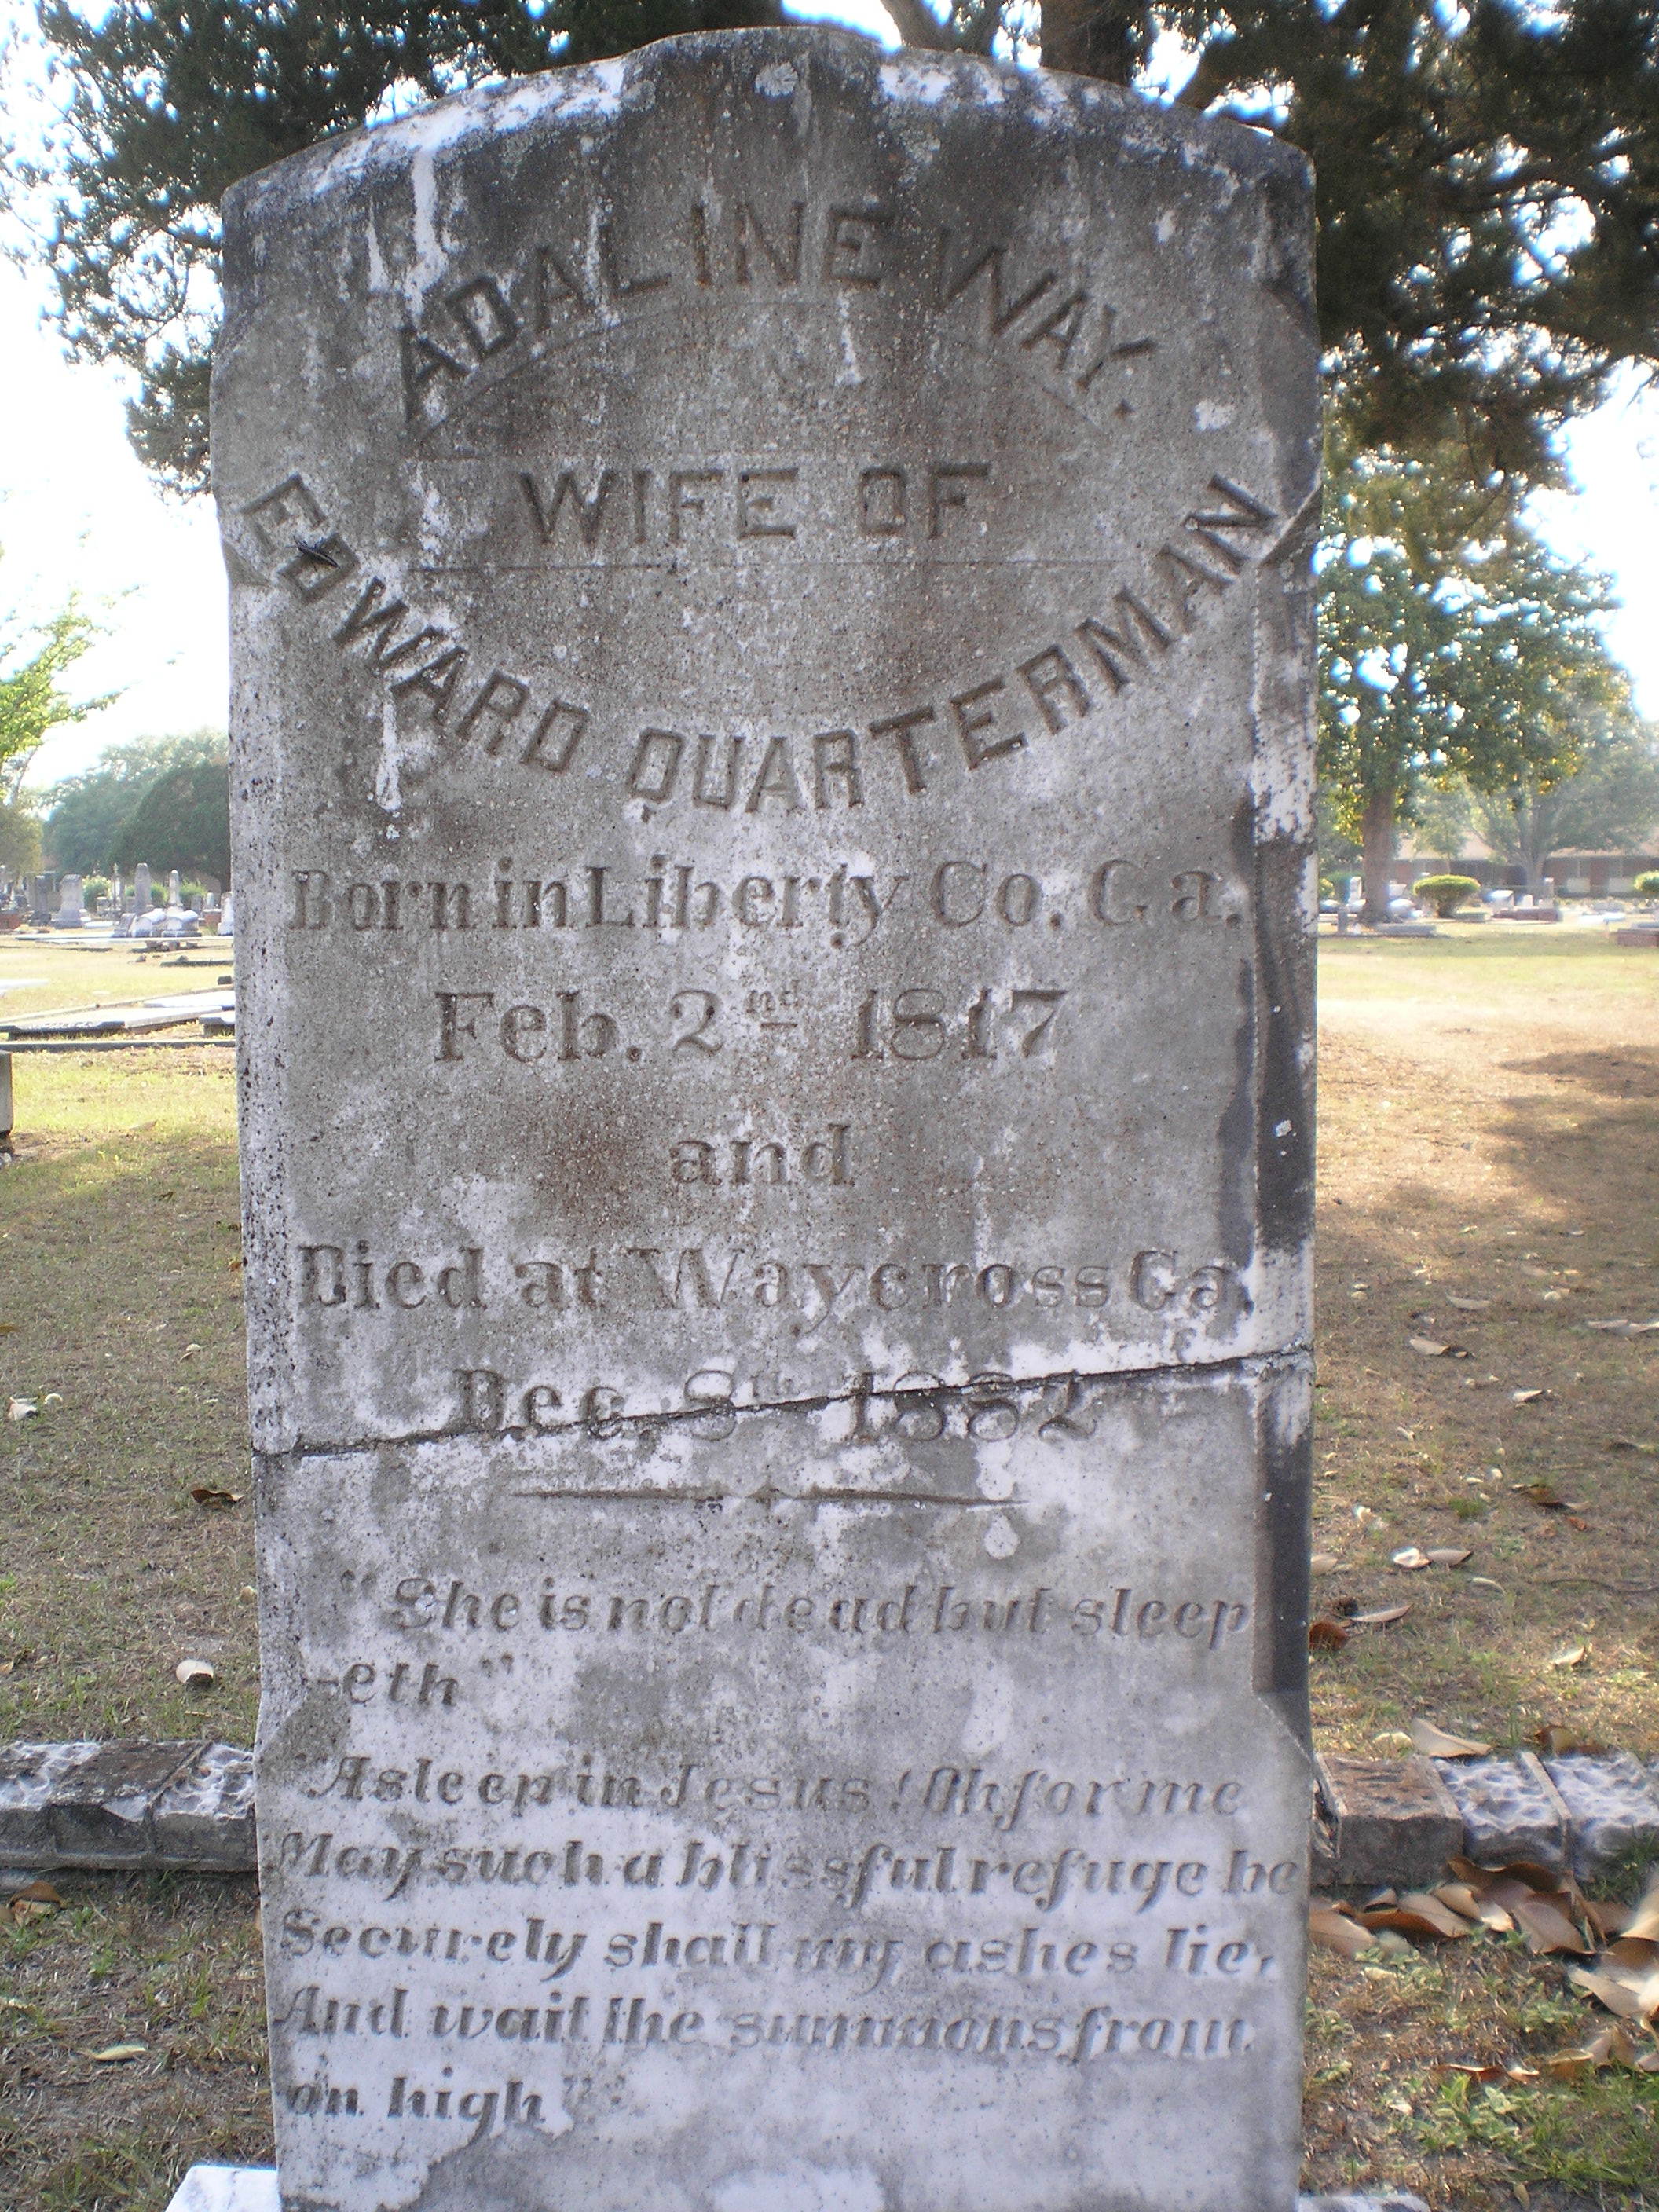     ADALINE WAY    WIFE OF    EDWARD QUARTERMAN    Born in Liberty Co. Ga.    Feb. 2   nd    1817    and    Died at Waycross Ga.       Dec. 8   th    1882             “She is not dead but sleep     -eth”      “Asleep in Jesus! Oh for me     May such a blissful refuge be     Securely shall my ashes lie,     And wait the summons from     on high”   